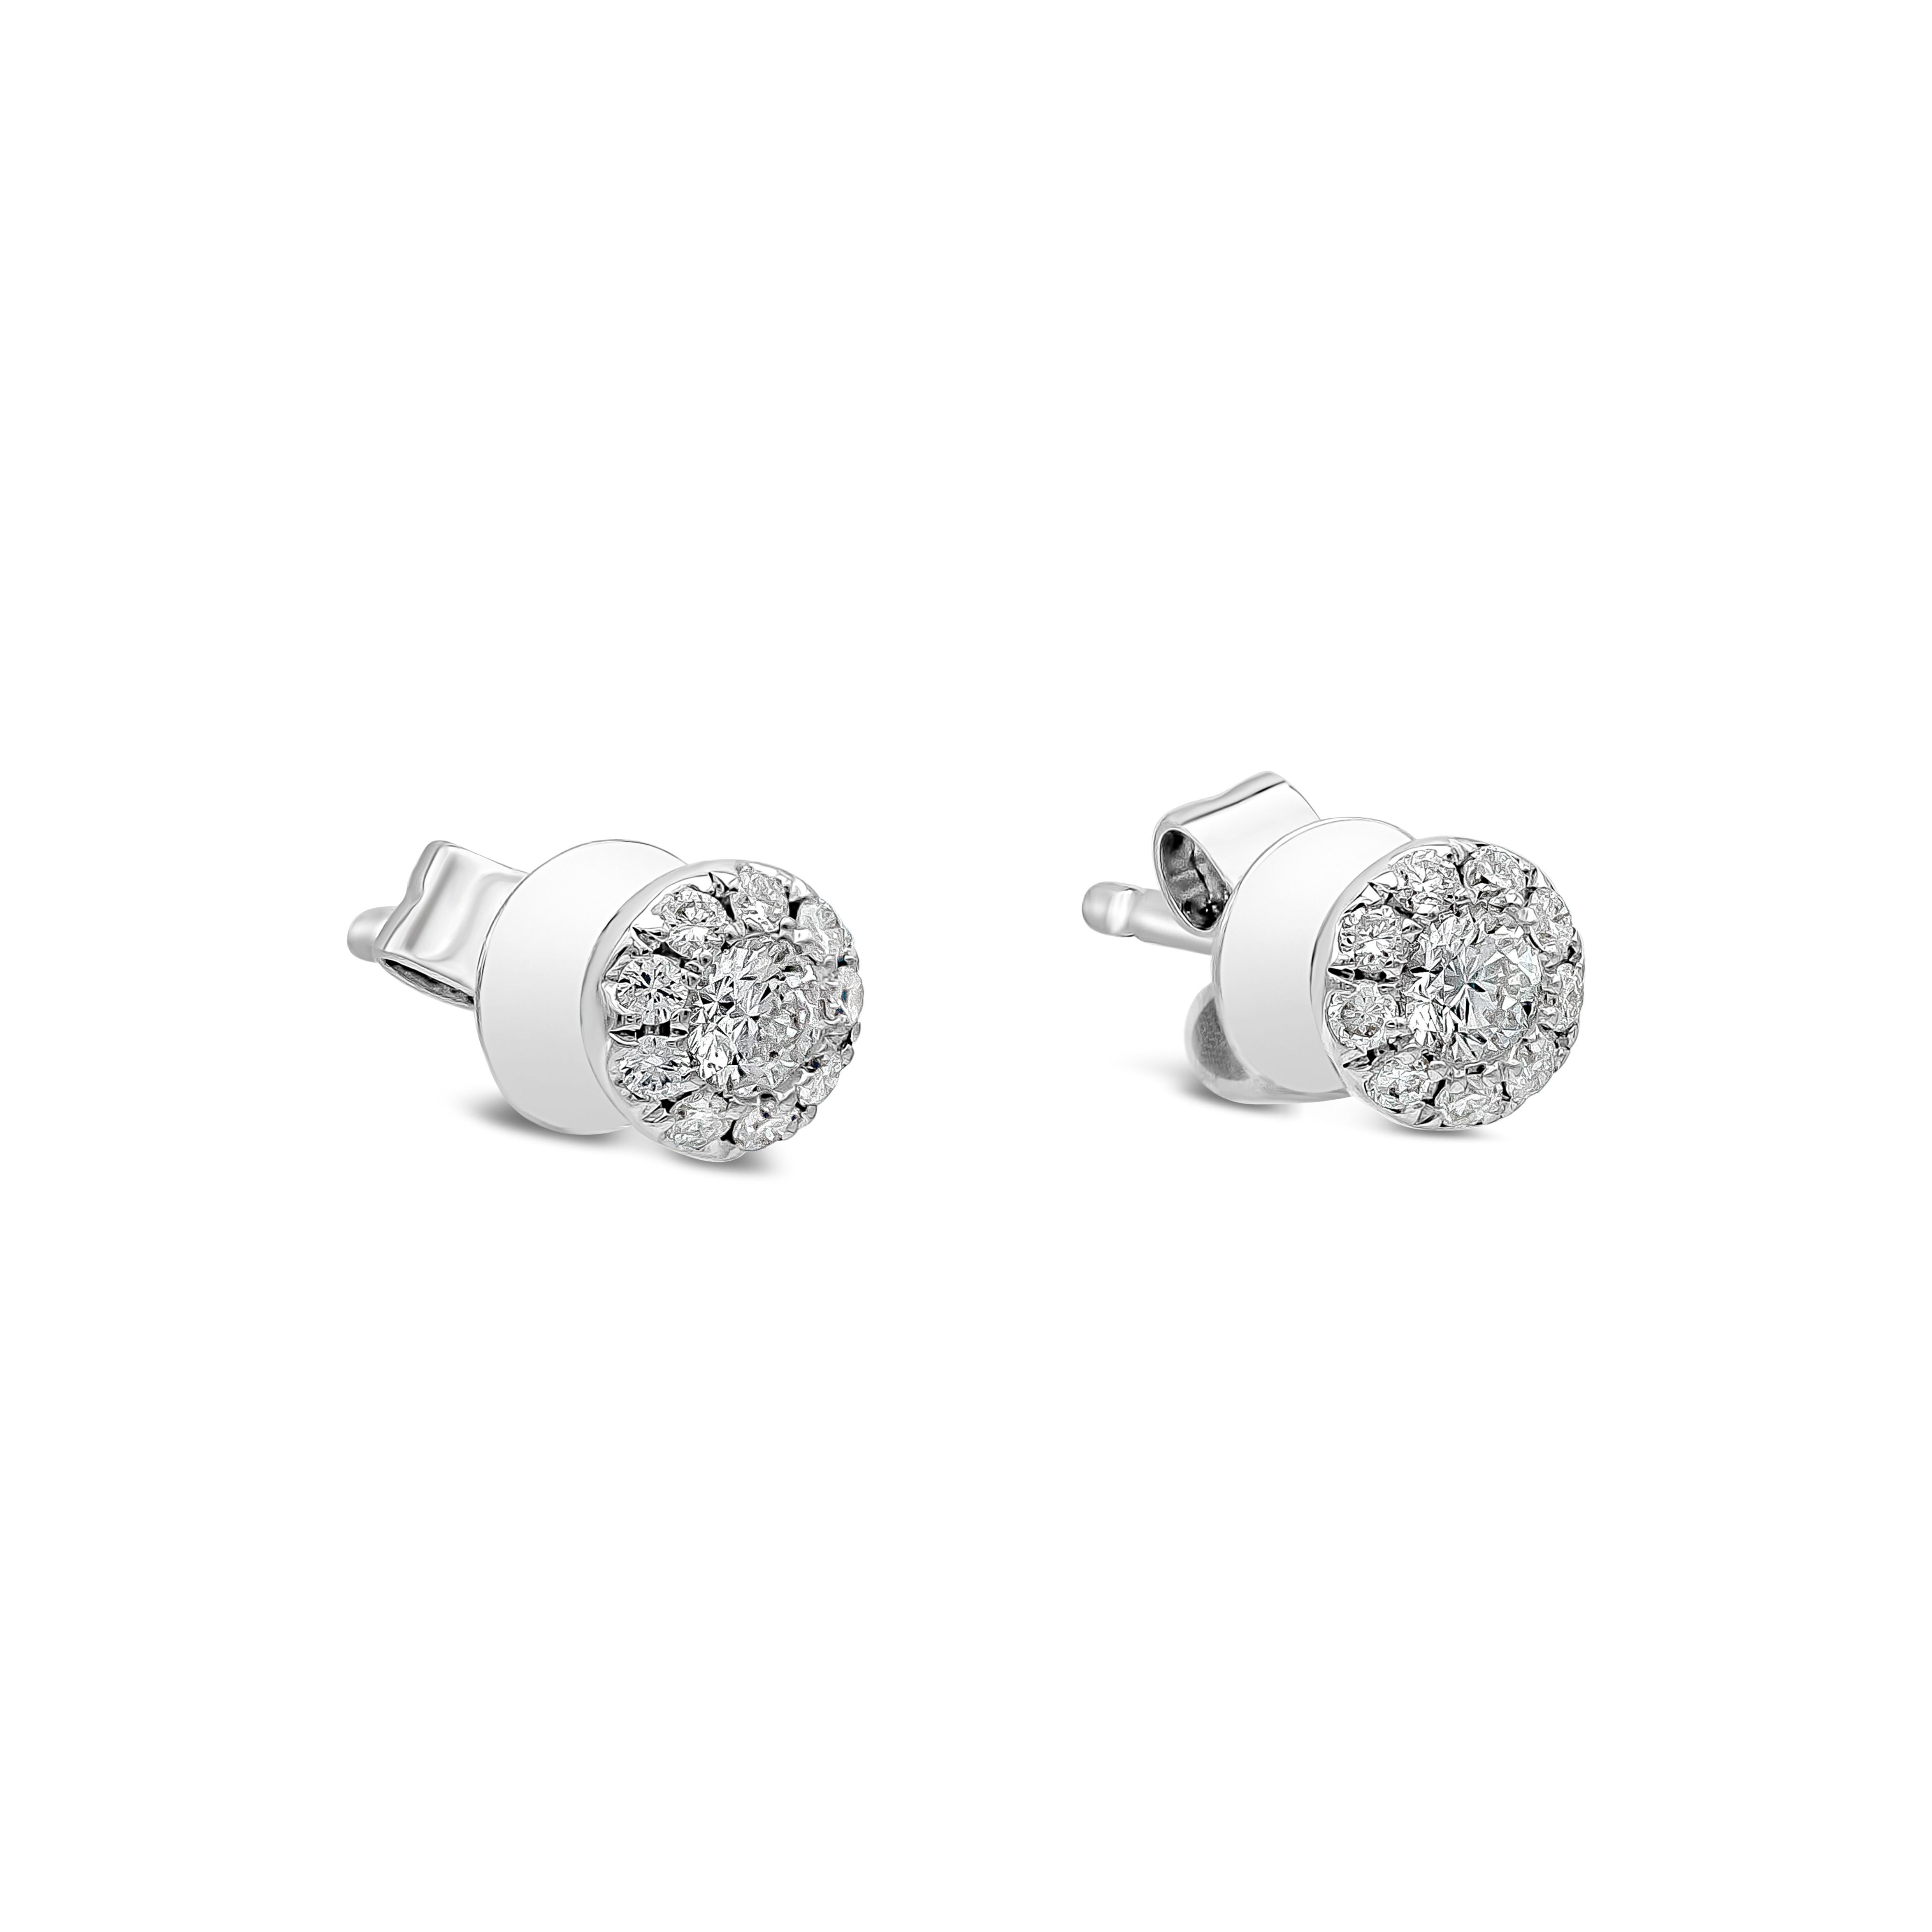 A classic pair of stud earrings showcasing a cluster of round brilliant diamonds set in an 18k white gold mounting. Diamonds weigh 0.21 carats total and are approximately F color, SI clarity. 

Style available in different price ranges. Prices are